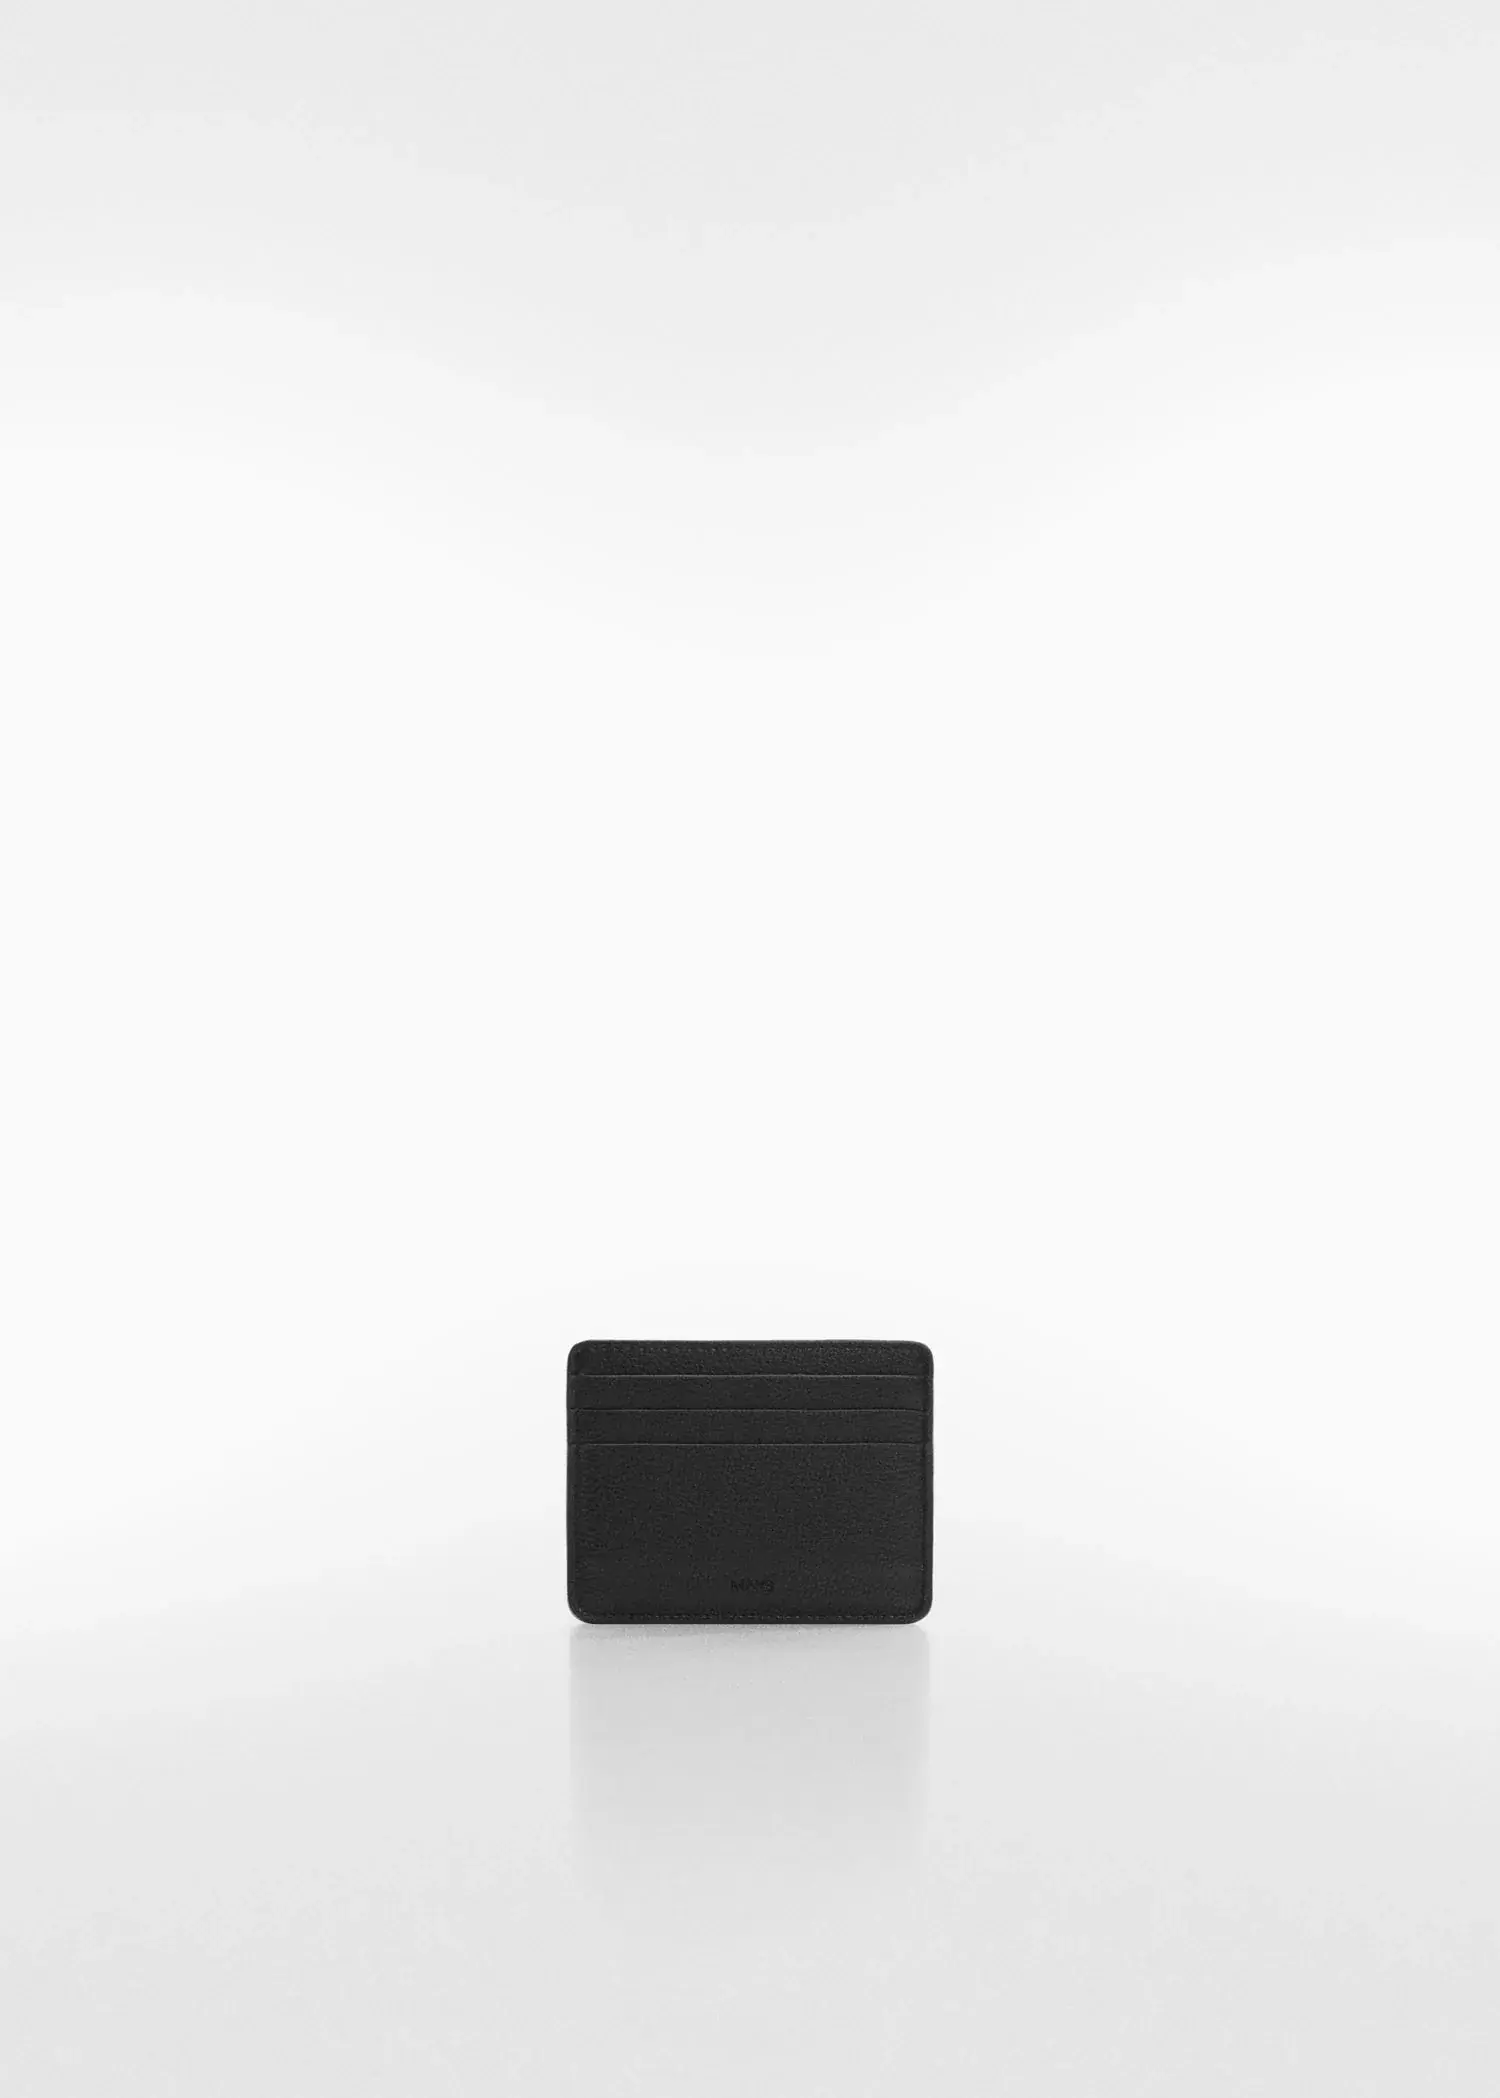 Mango Anti-contactless leather-effect card holder. a square black object sitting on top of a white surface. 